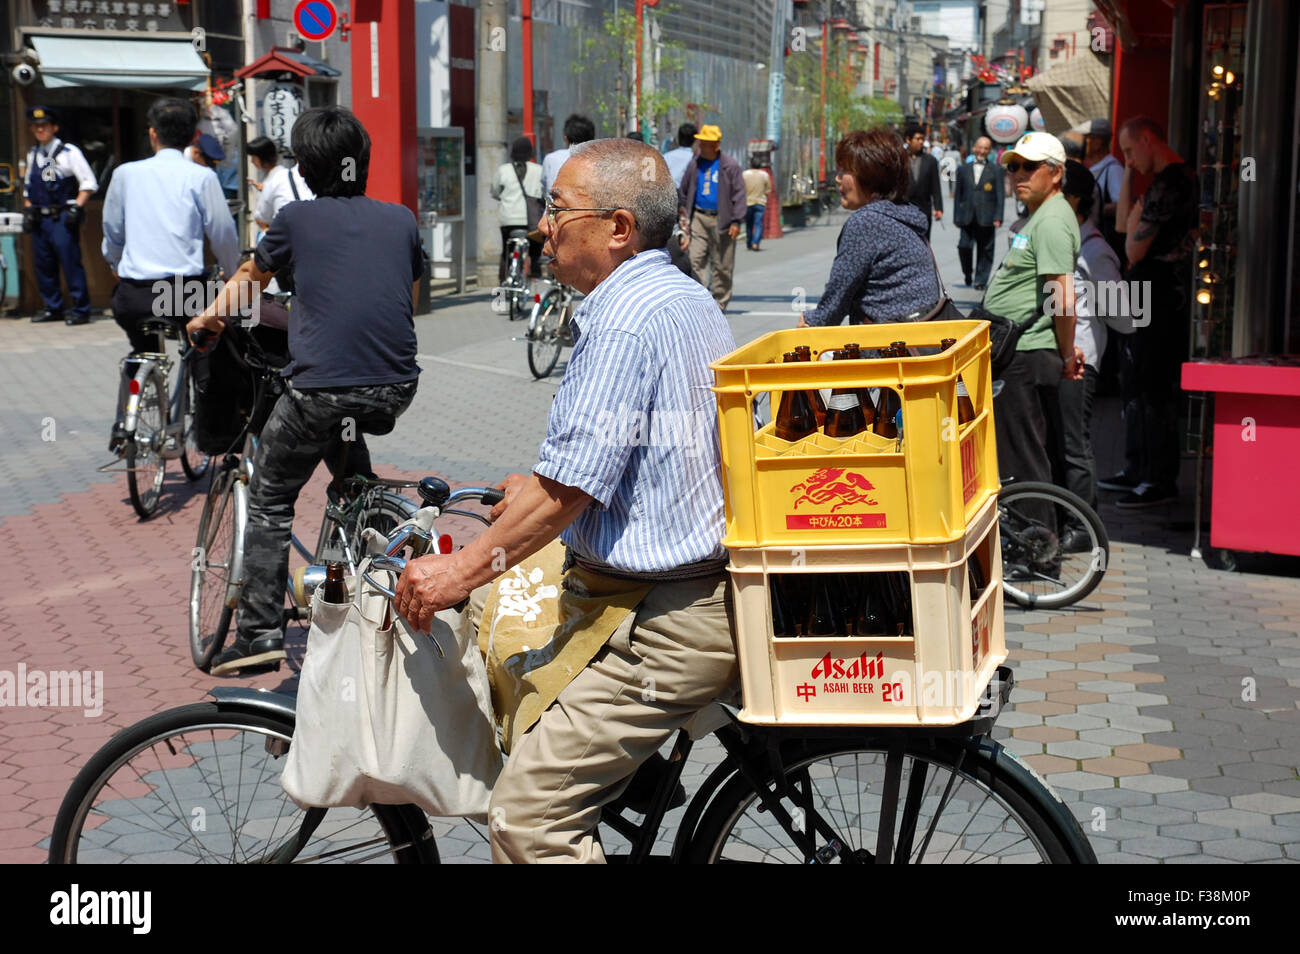 Japanese man on a bicycle transporting beer in crates in the Asakusa Ward of Tokyo, Japan. Stock Photo